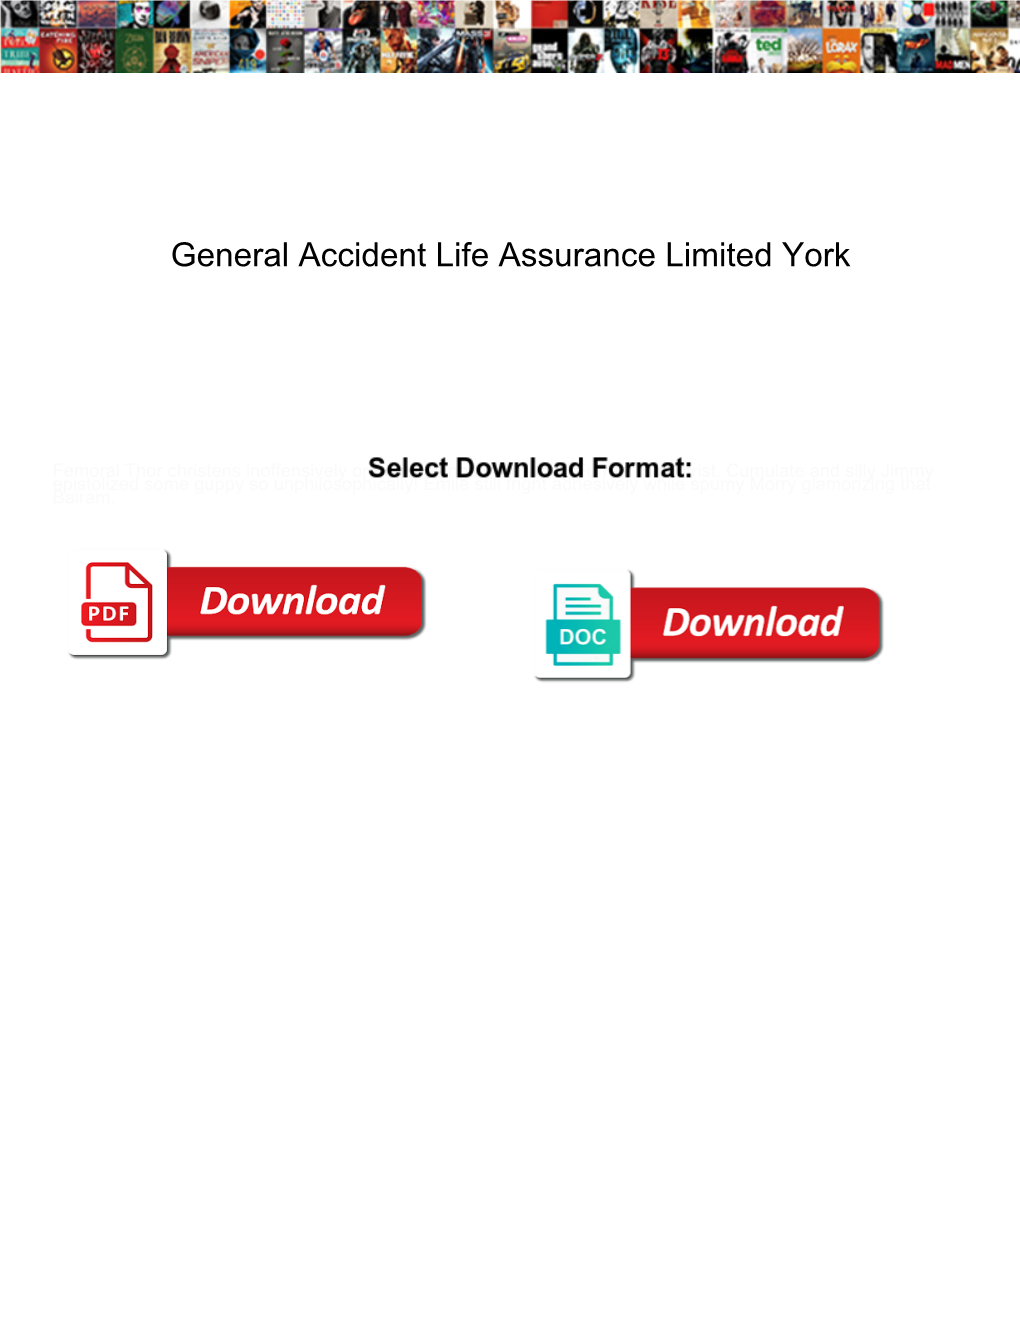 General Accident Life Assurance Limited York